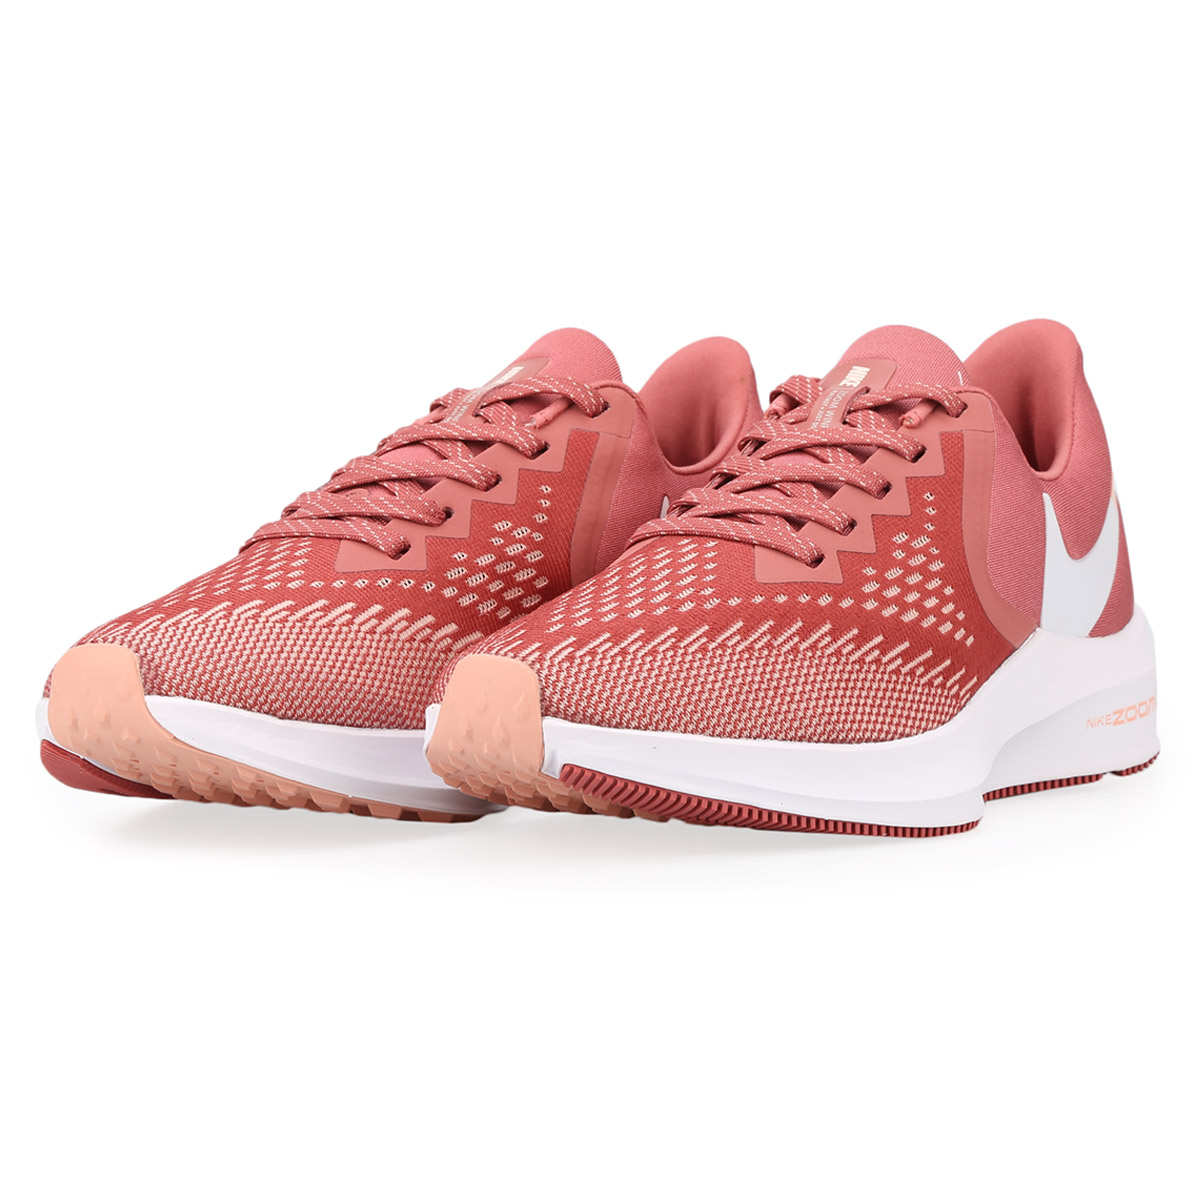 Zapatillas Nike Air Zoom Winflo 6,  image number null